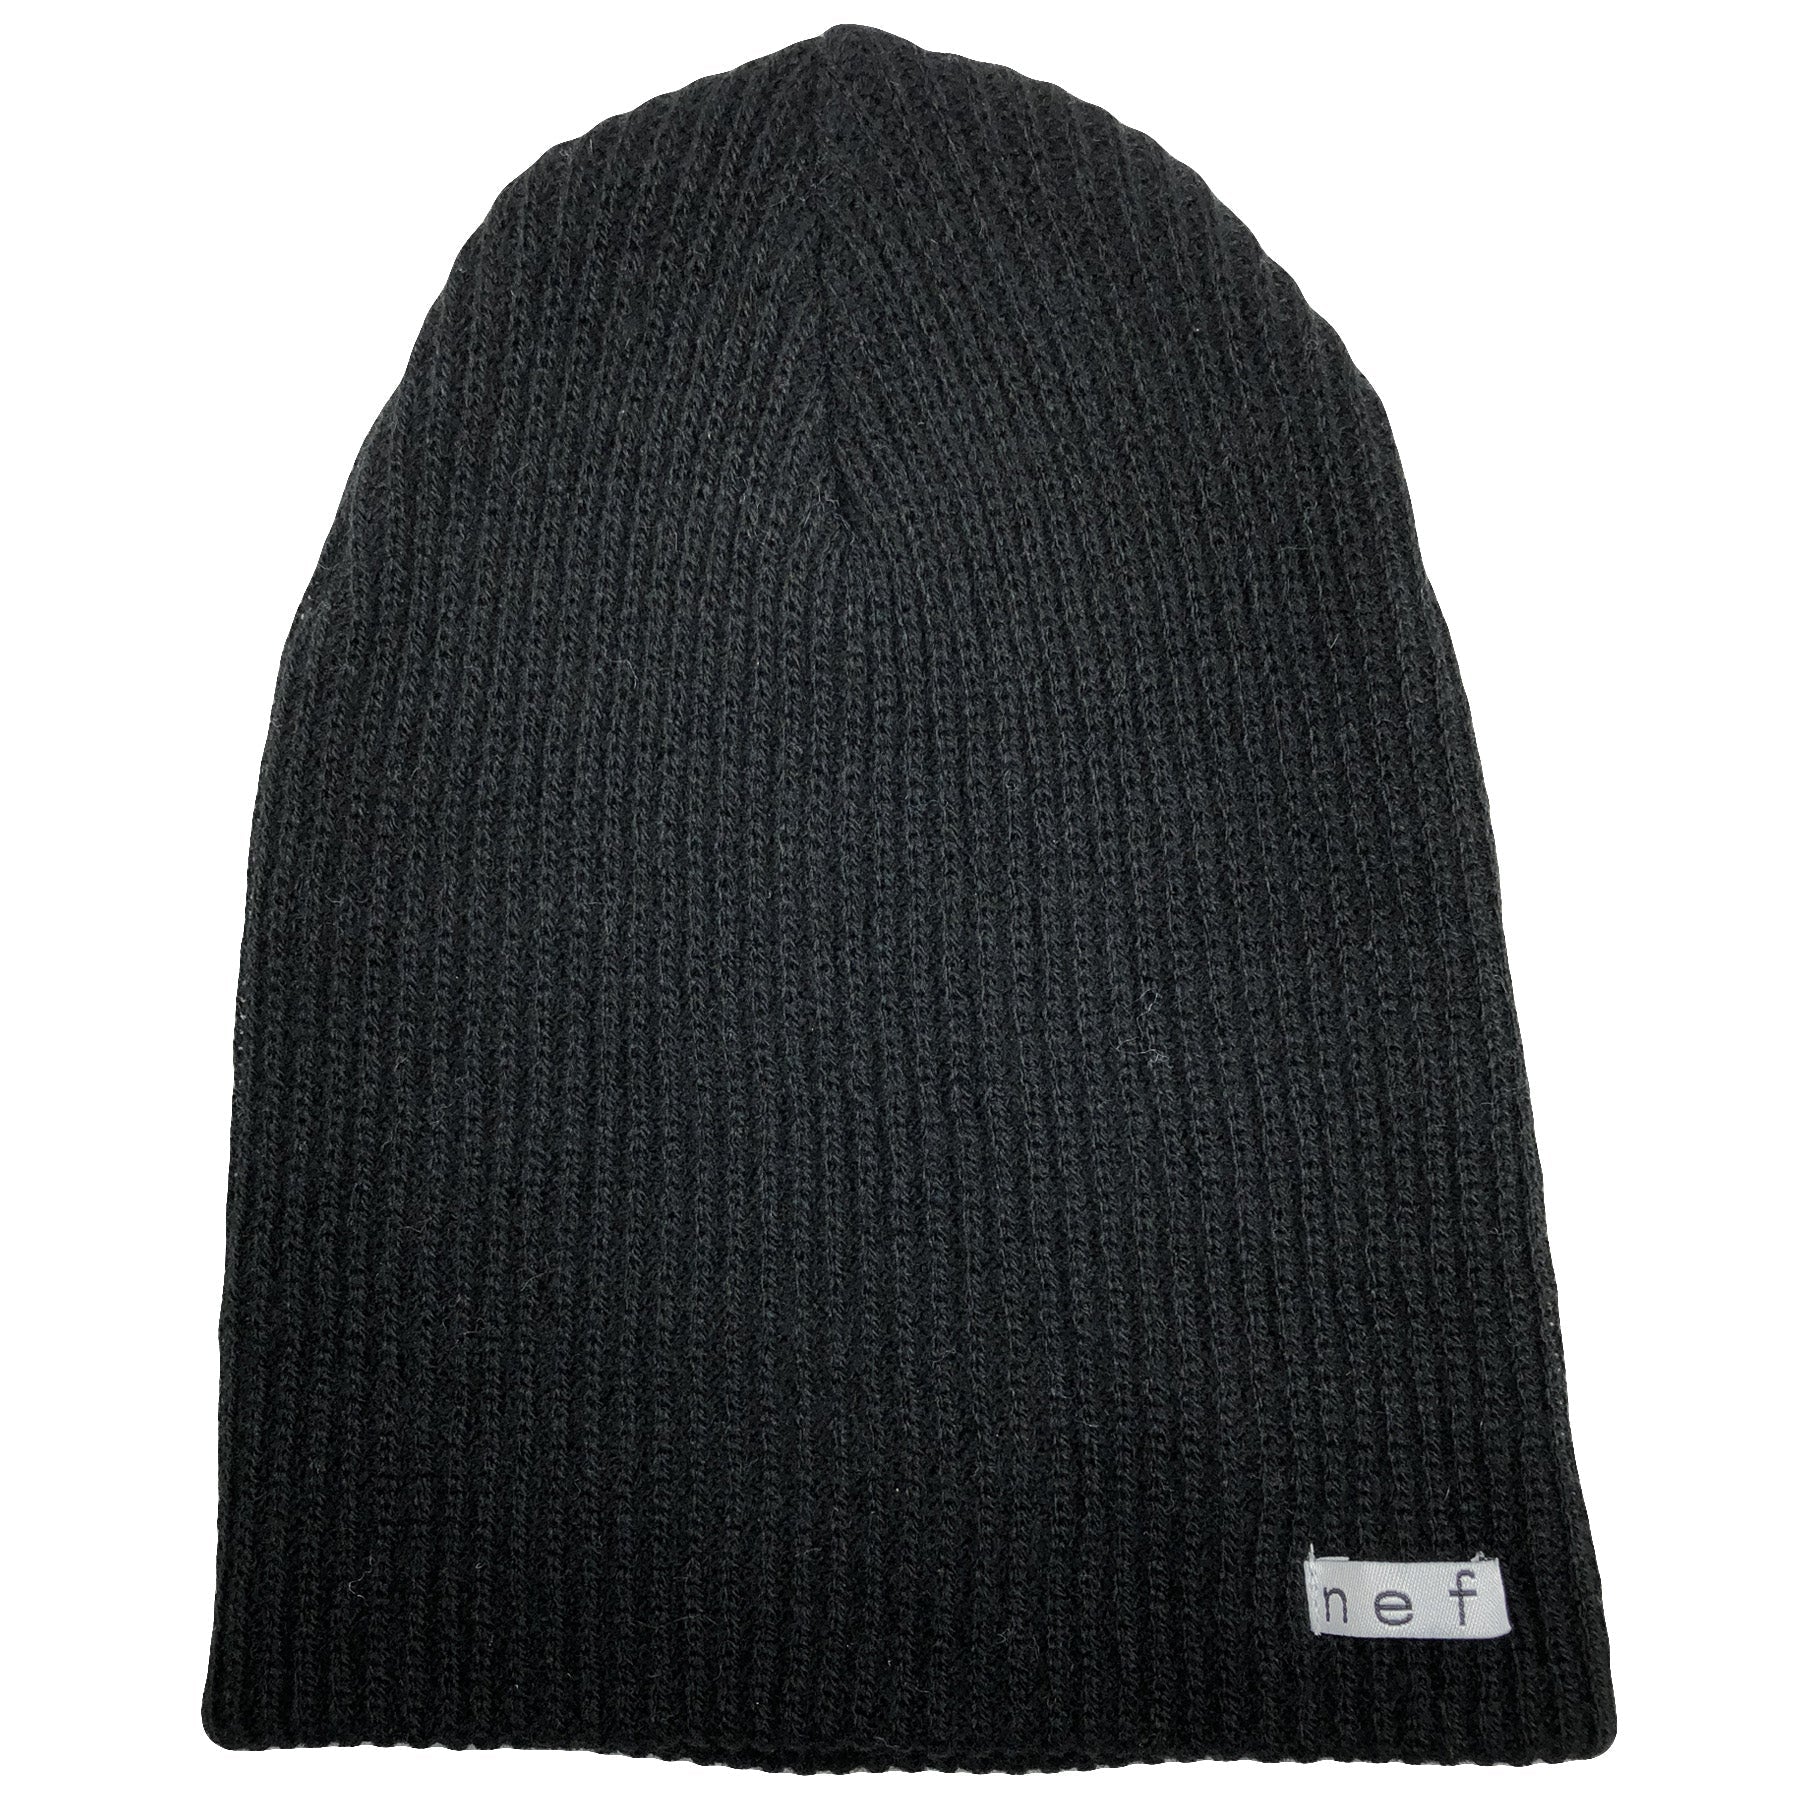 the black neff daily beanie is solid black with a loose knit material and the neff label stitched in white and black